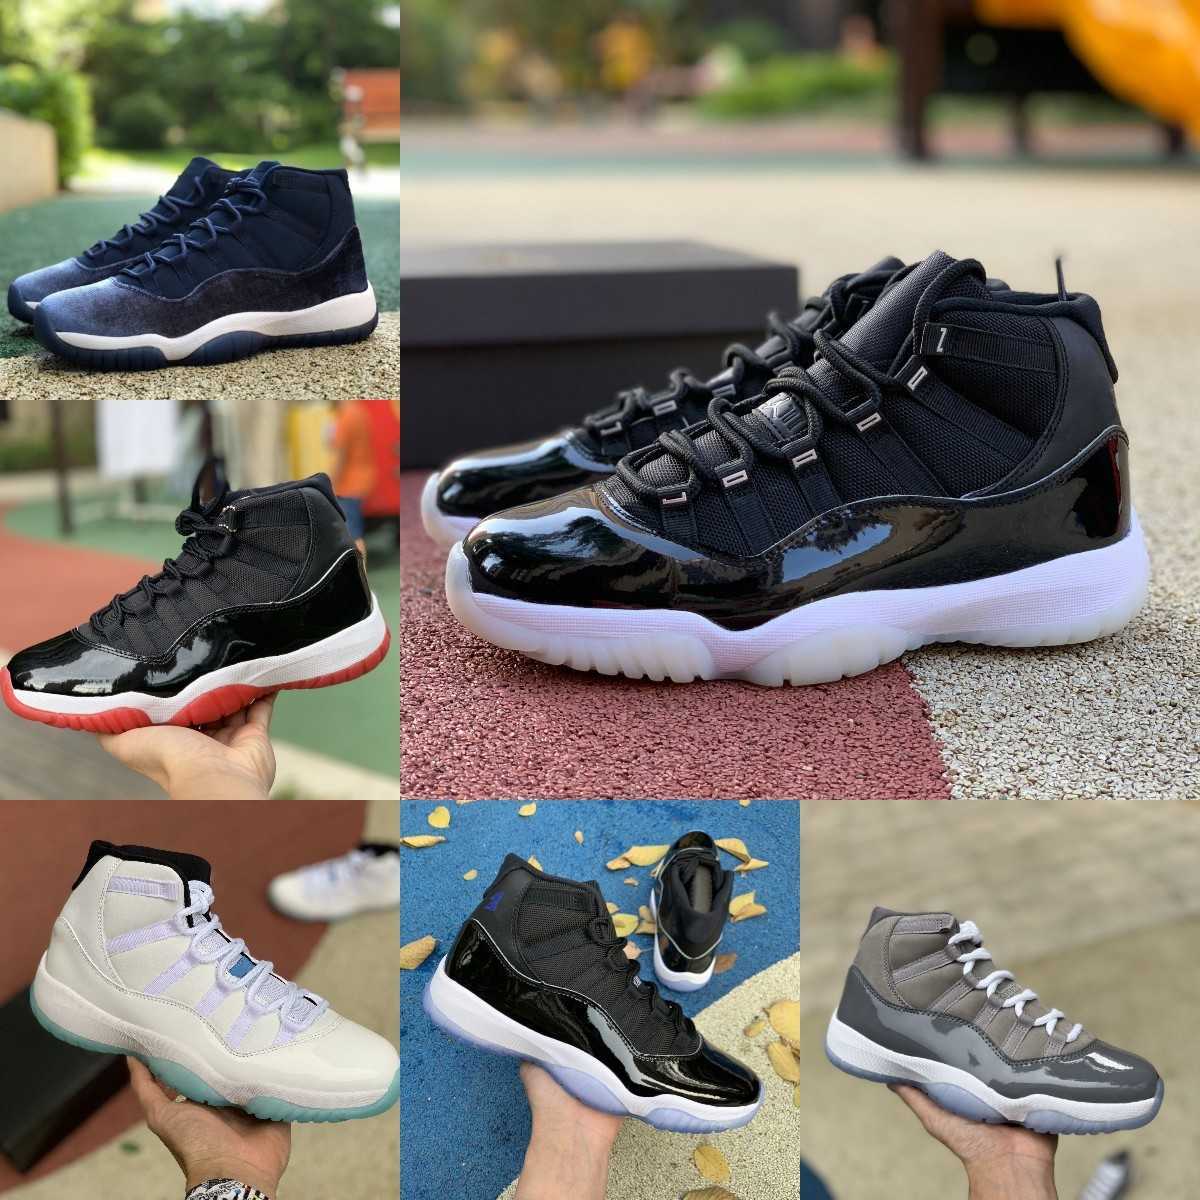 

Jumpman Jubilee 11 11s High Basketball Shoes COOL GREY Legend Blue Midnight Navy Playoffs Bred Space Jam Gamma Blue Barons Concord 45 Low Columbia Trainer Sneakers S8, Please contact us